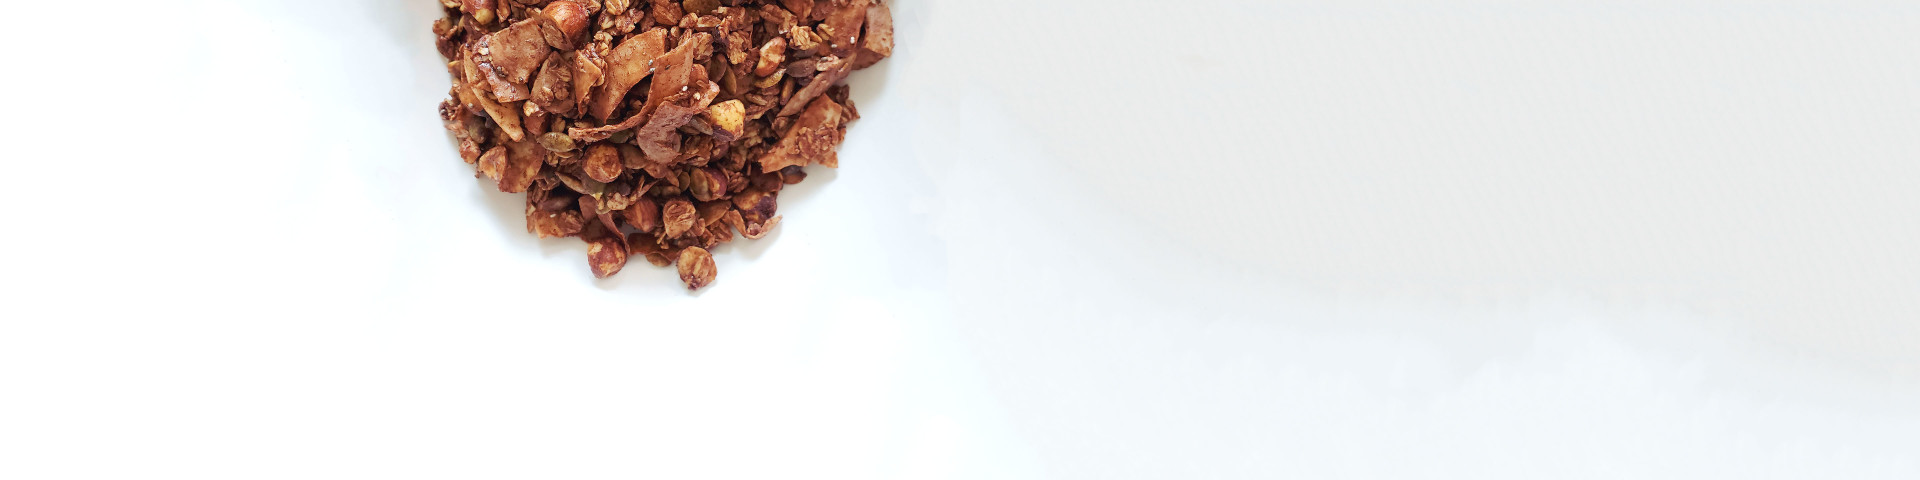 Trust us: You're going to want to try this chocolatey vegan granola recipe.